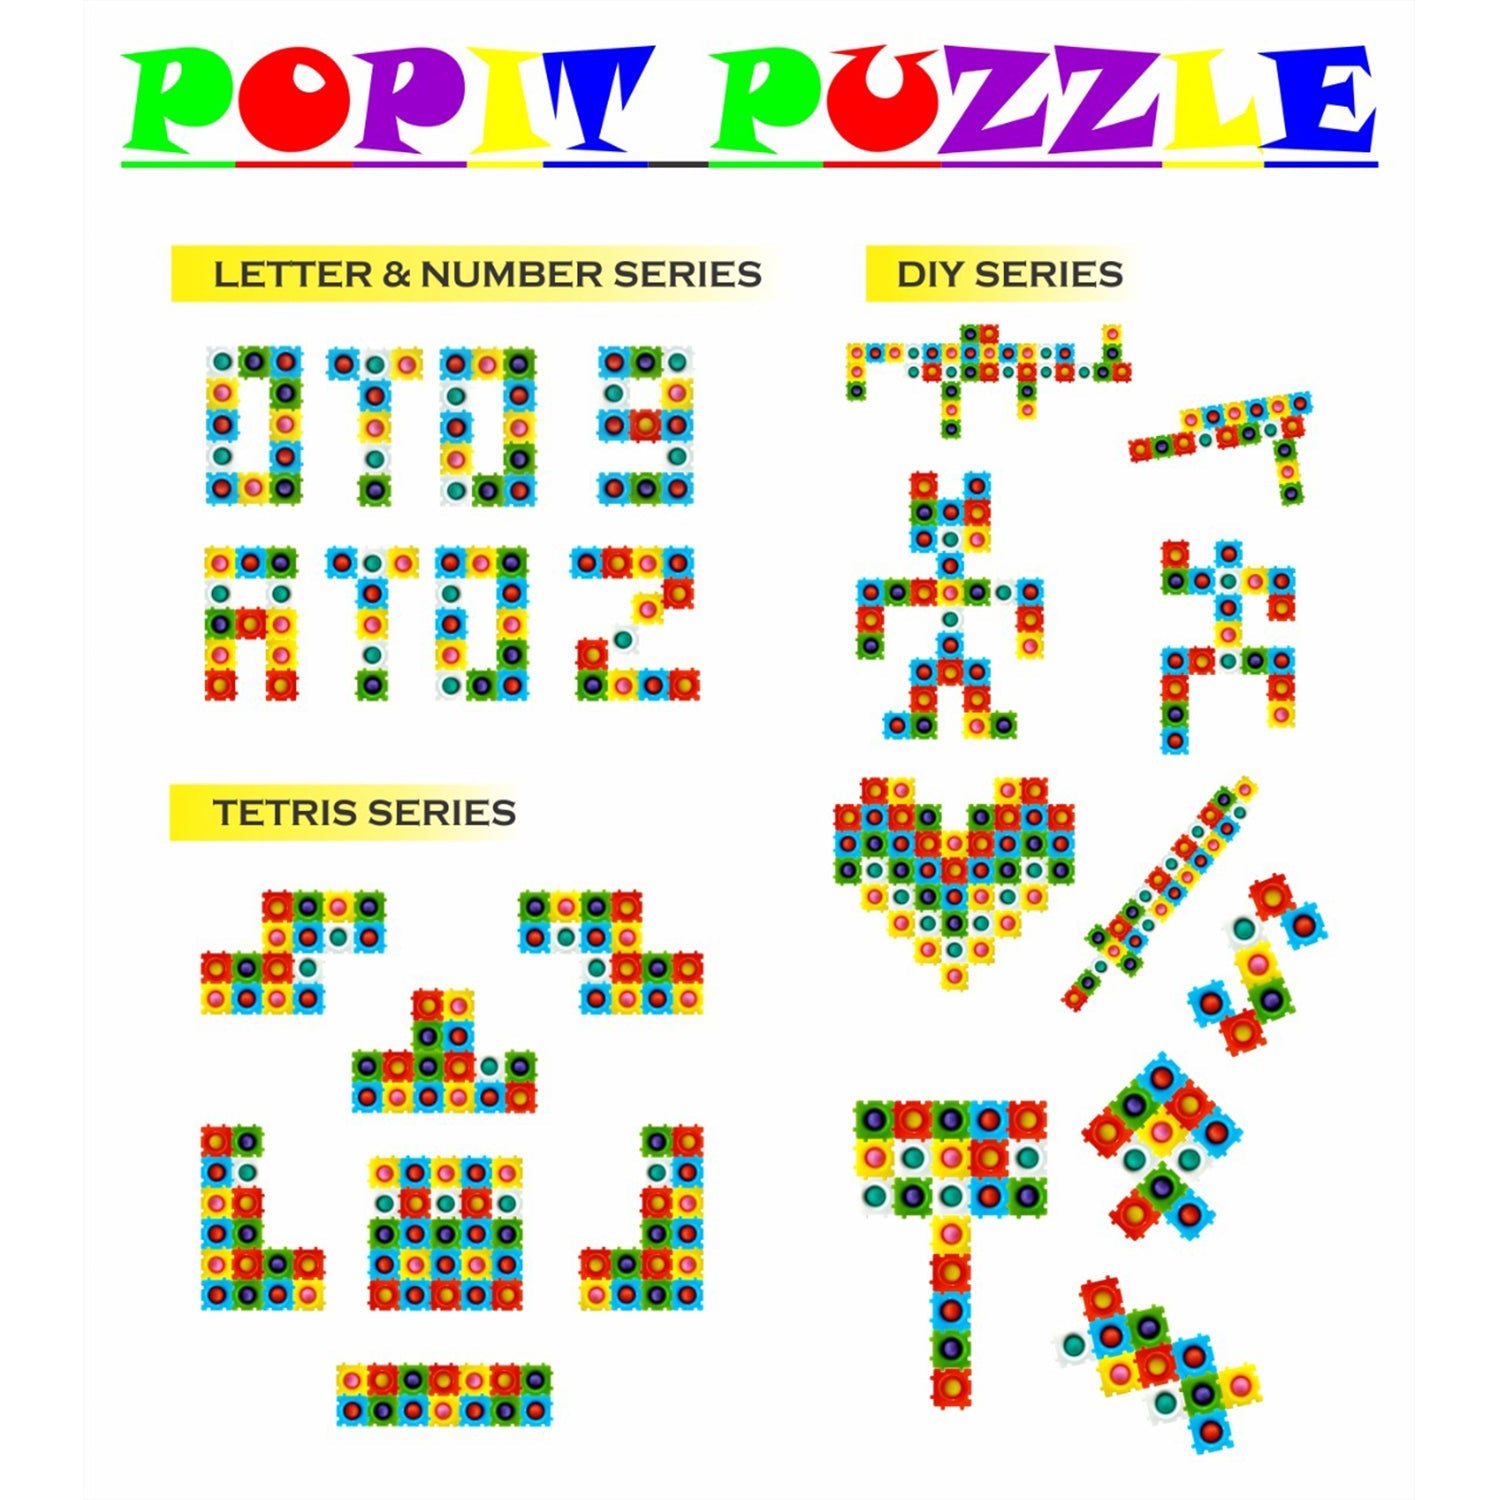 4788 Popit Puzzle Game 30Pc used by kids and children’s for playing and enjoying etc. DeoDap